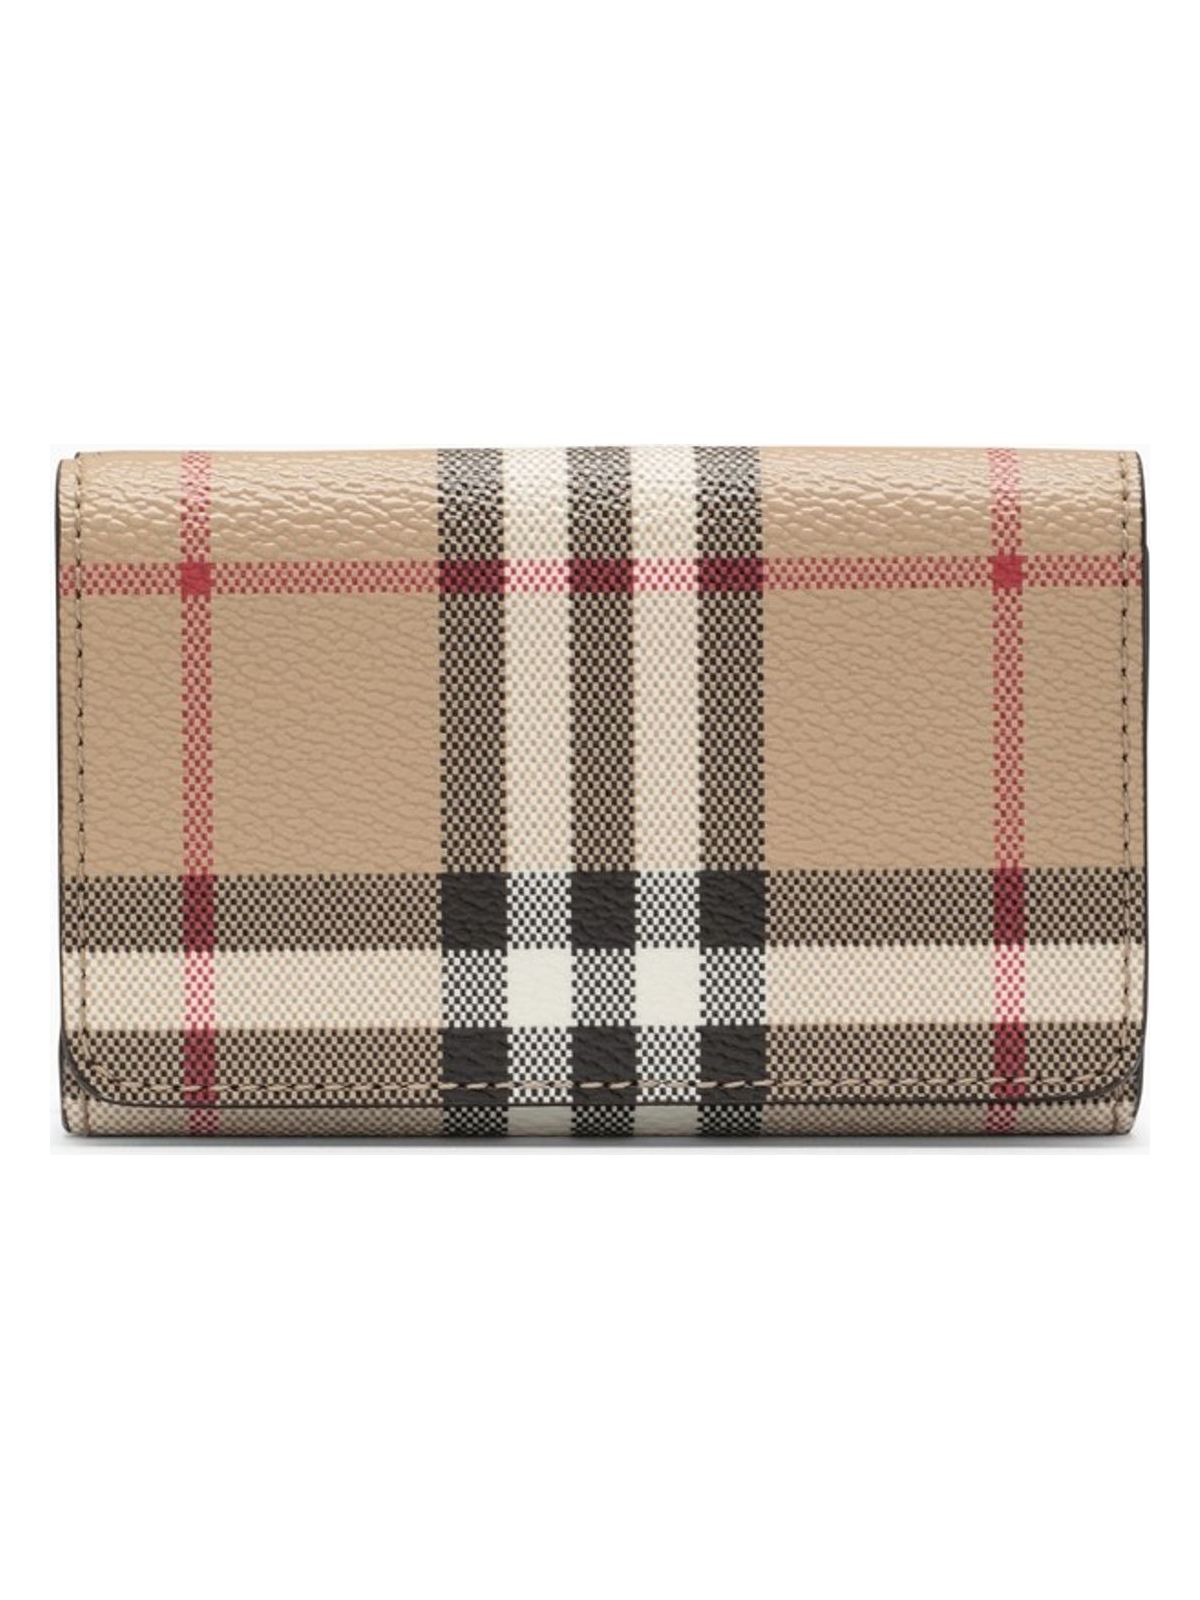 A7026 BURBERRY CHECKED FABRIC WALLET